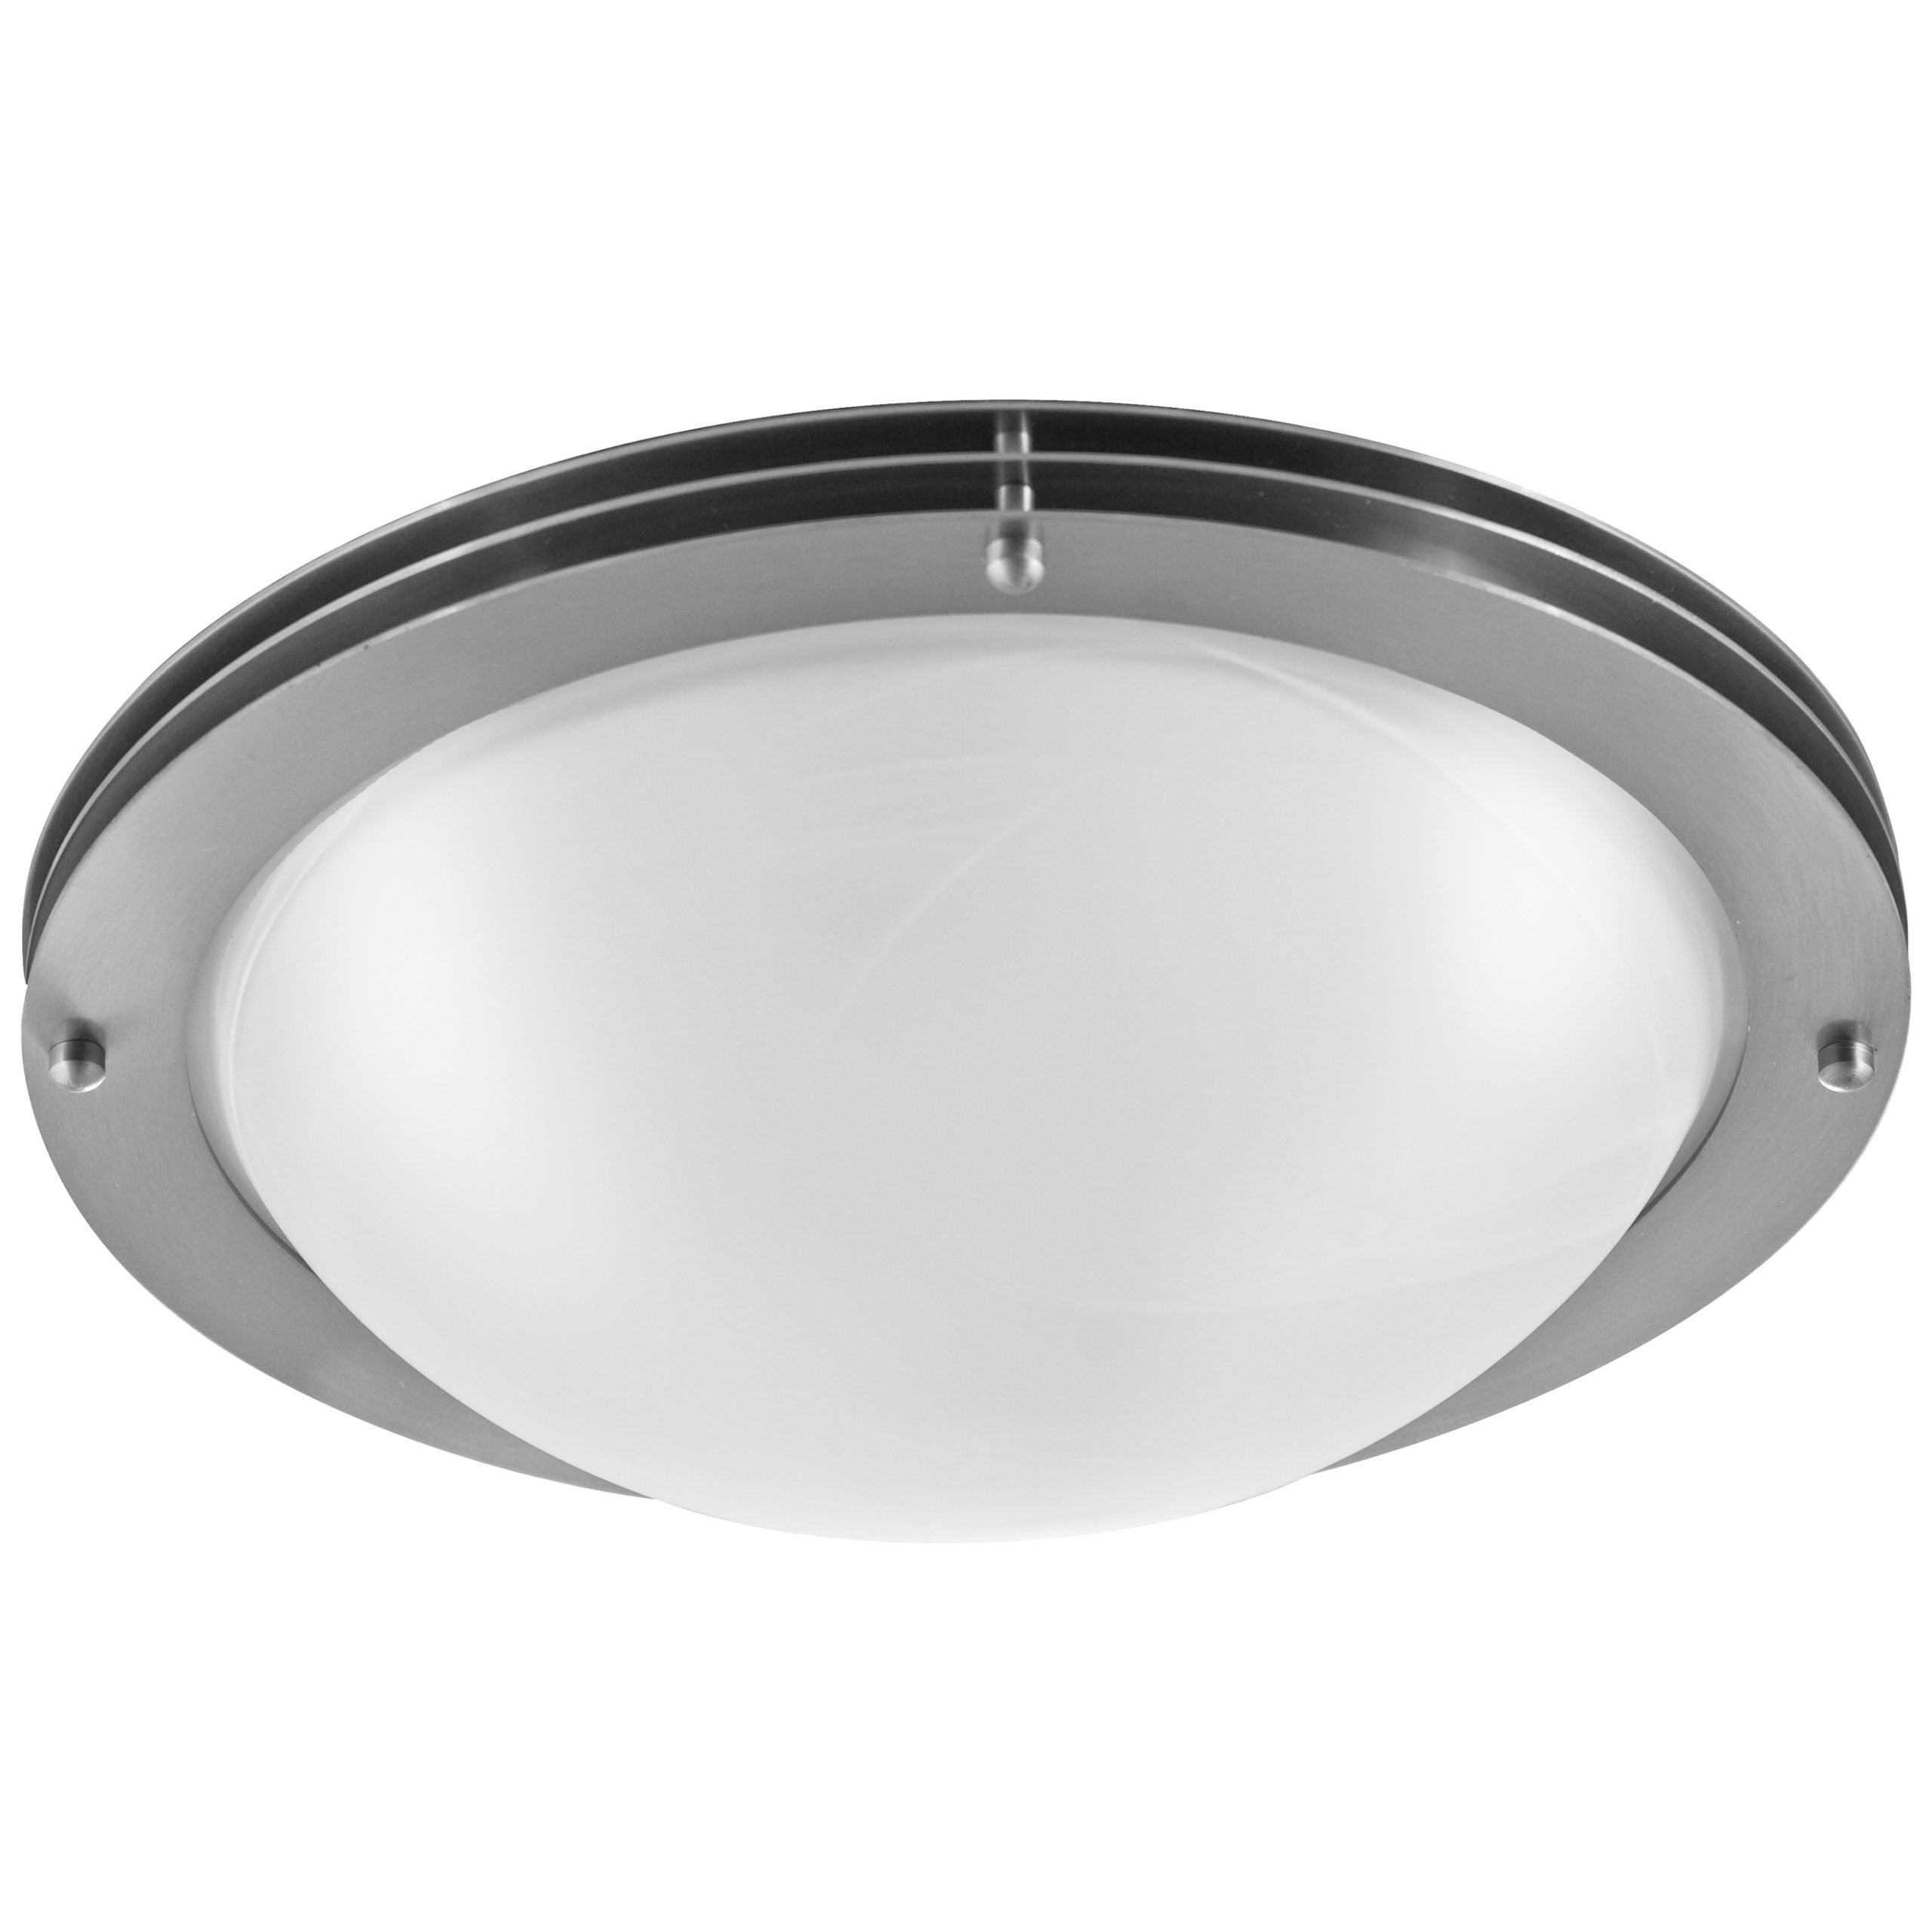 16"W Brushed Nickel Ceiling Light with Frosted Glass Shade